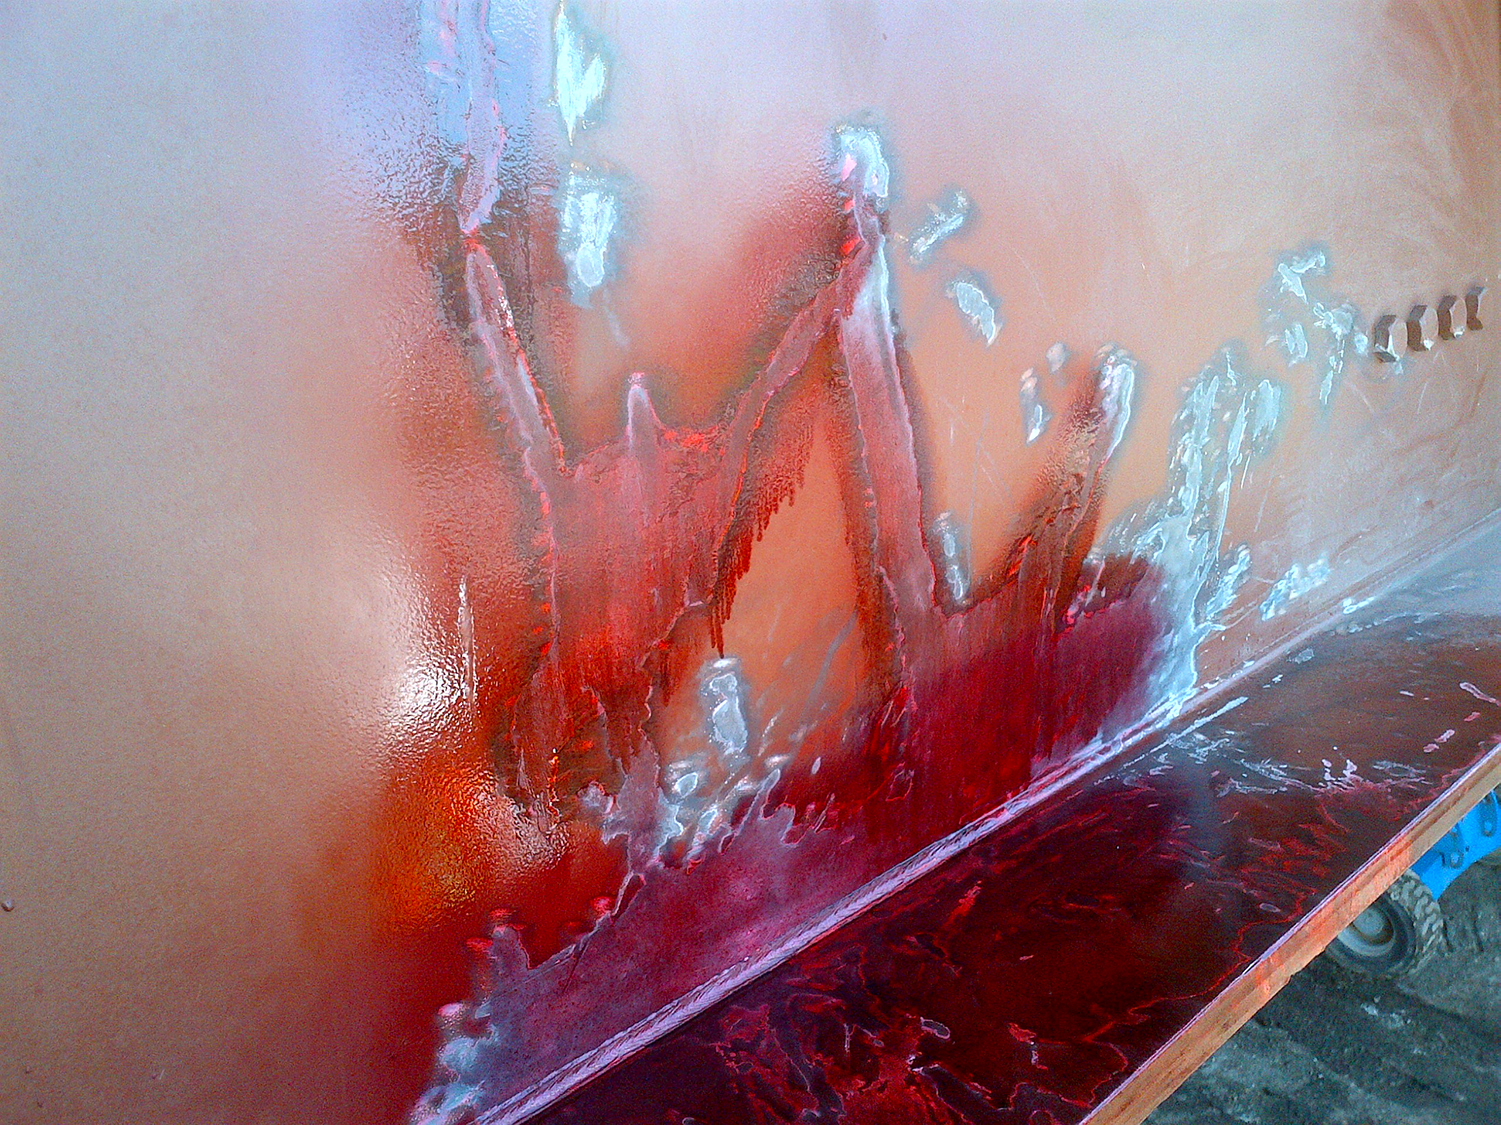 Sprayed red paint daubs on metal surface